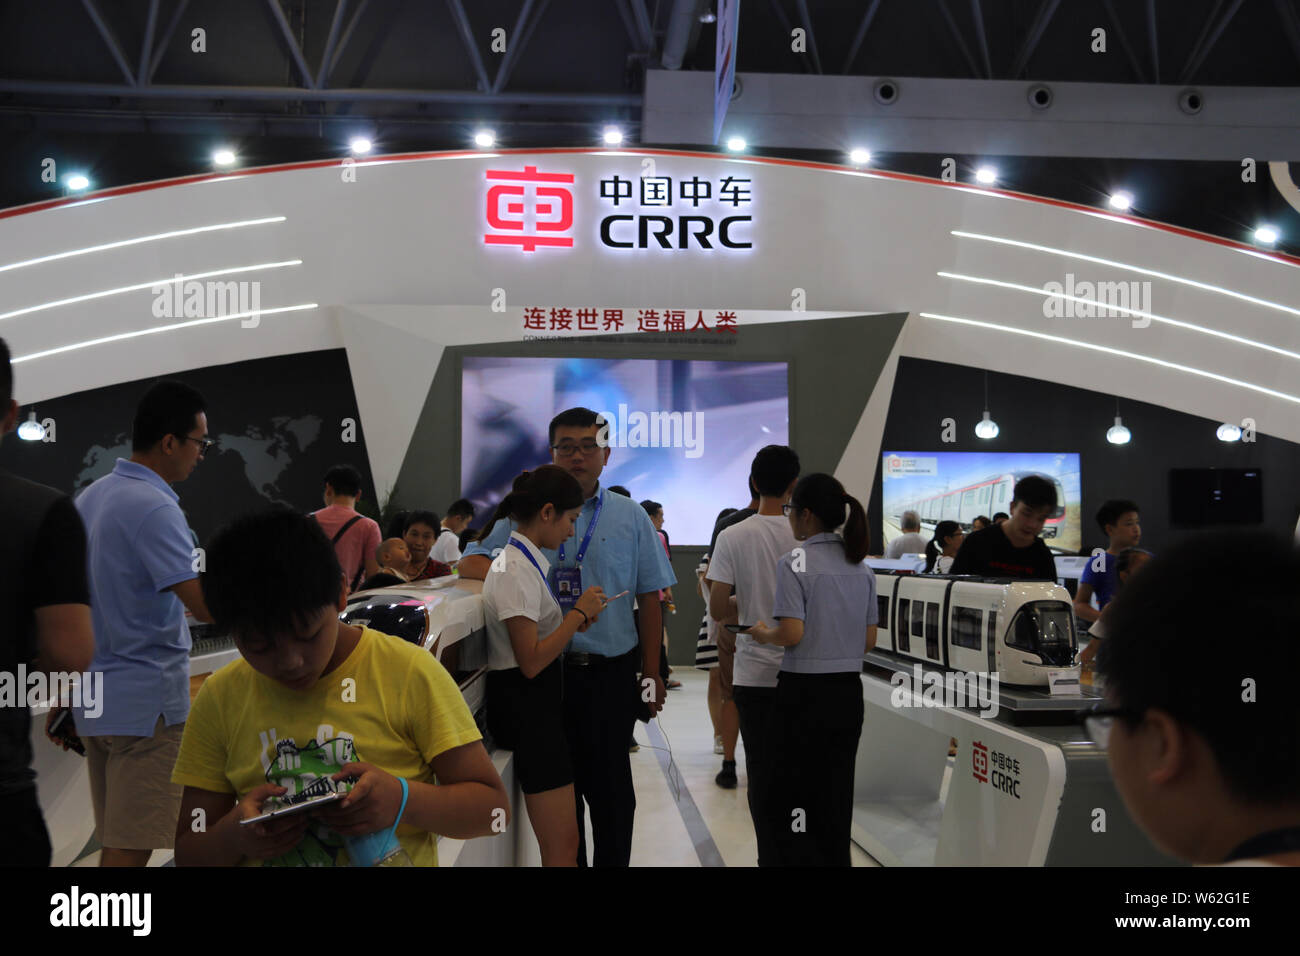 --FILE--People visit the stand of CRRC (China Railway Rolling Stock Corp) during an expo in Chongqing, China, 23 August 2018.   CRRC Zhuzhou Locomotiv Stock Photo